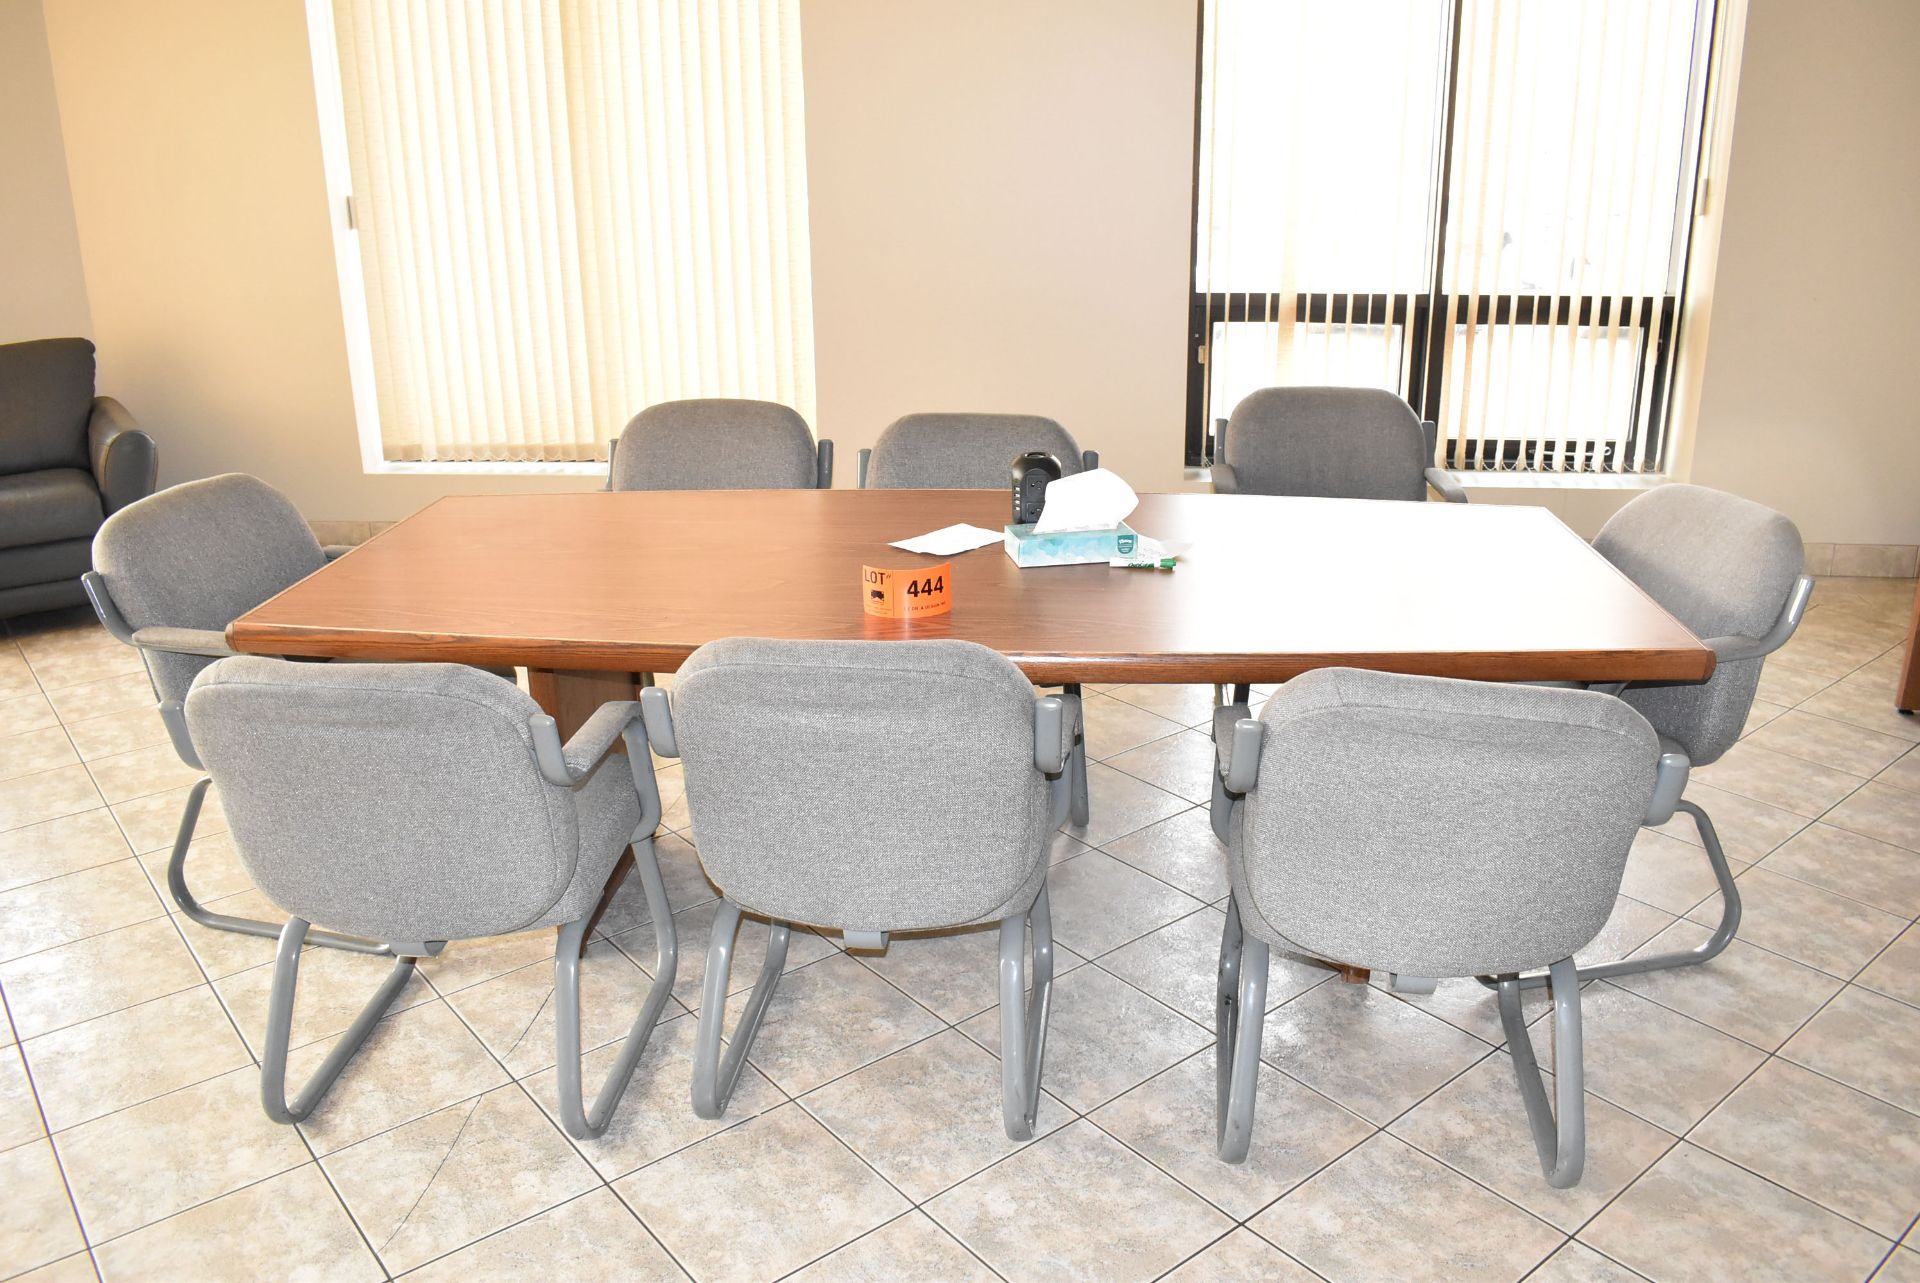 LOT/ BOARDROOM FURNITURE CONSISTING OF BOARDROOM TABLE, DESK, SHELVING & (8) CHAIRS (FURNITURE